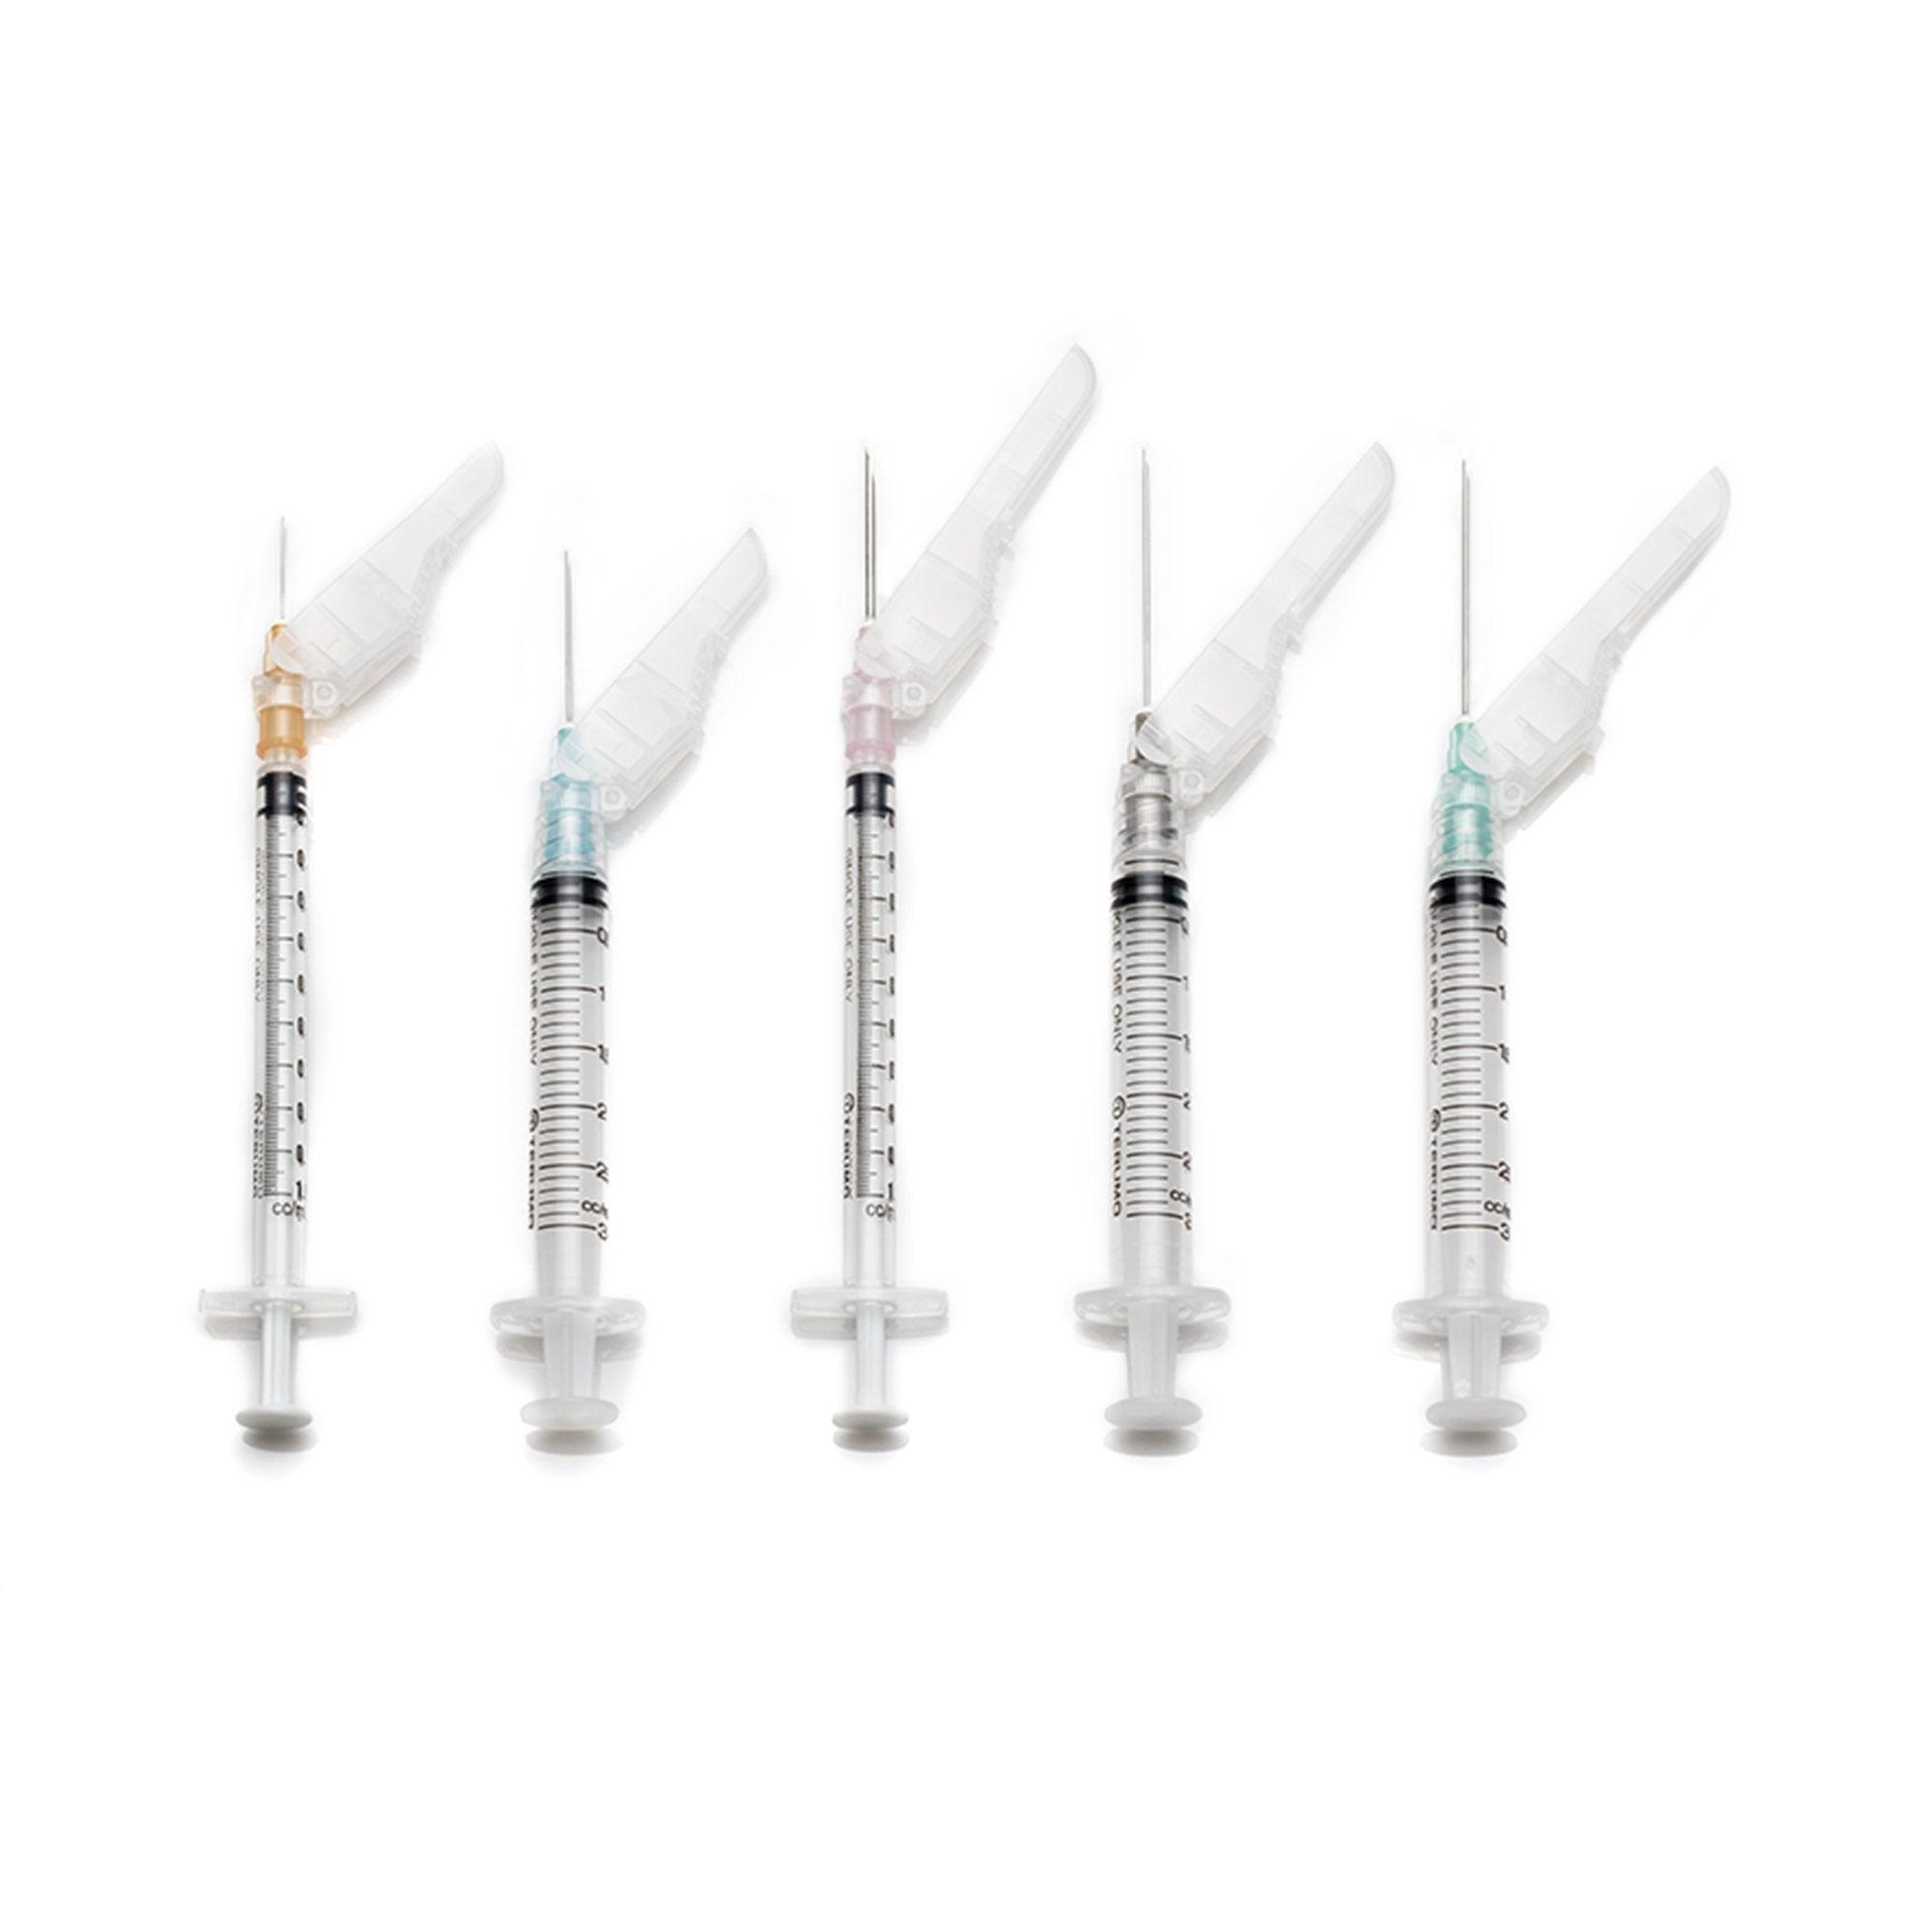 3 mL | 22G x 1 1/2" - Terumo SG3-03L2238 Hypodermic Syringes with Safety Needle | SurGuard 3 | 100 per Box